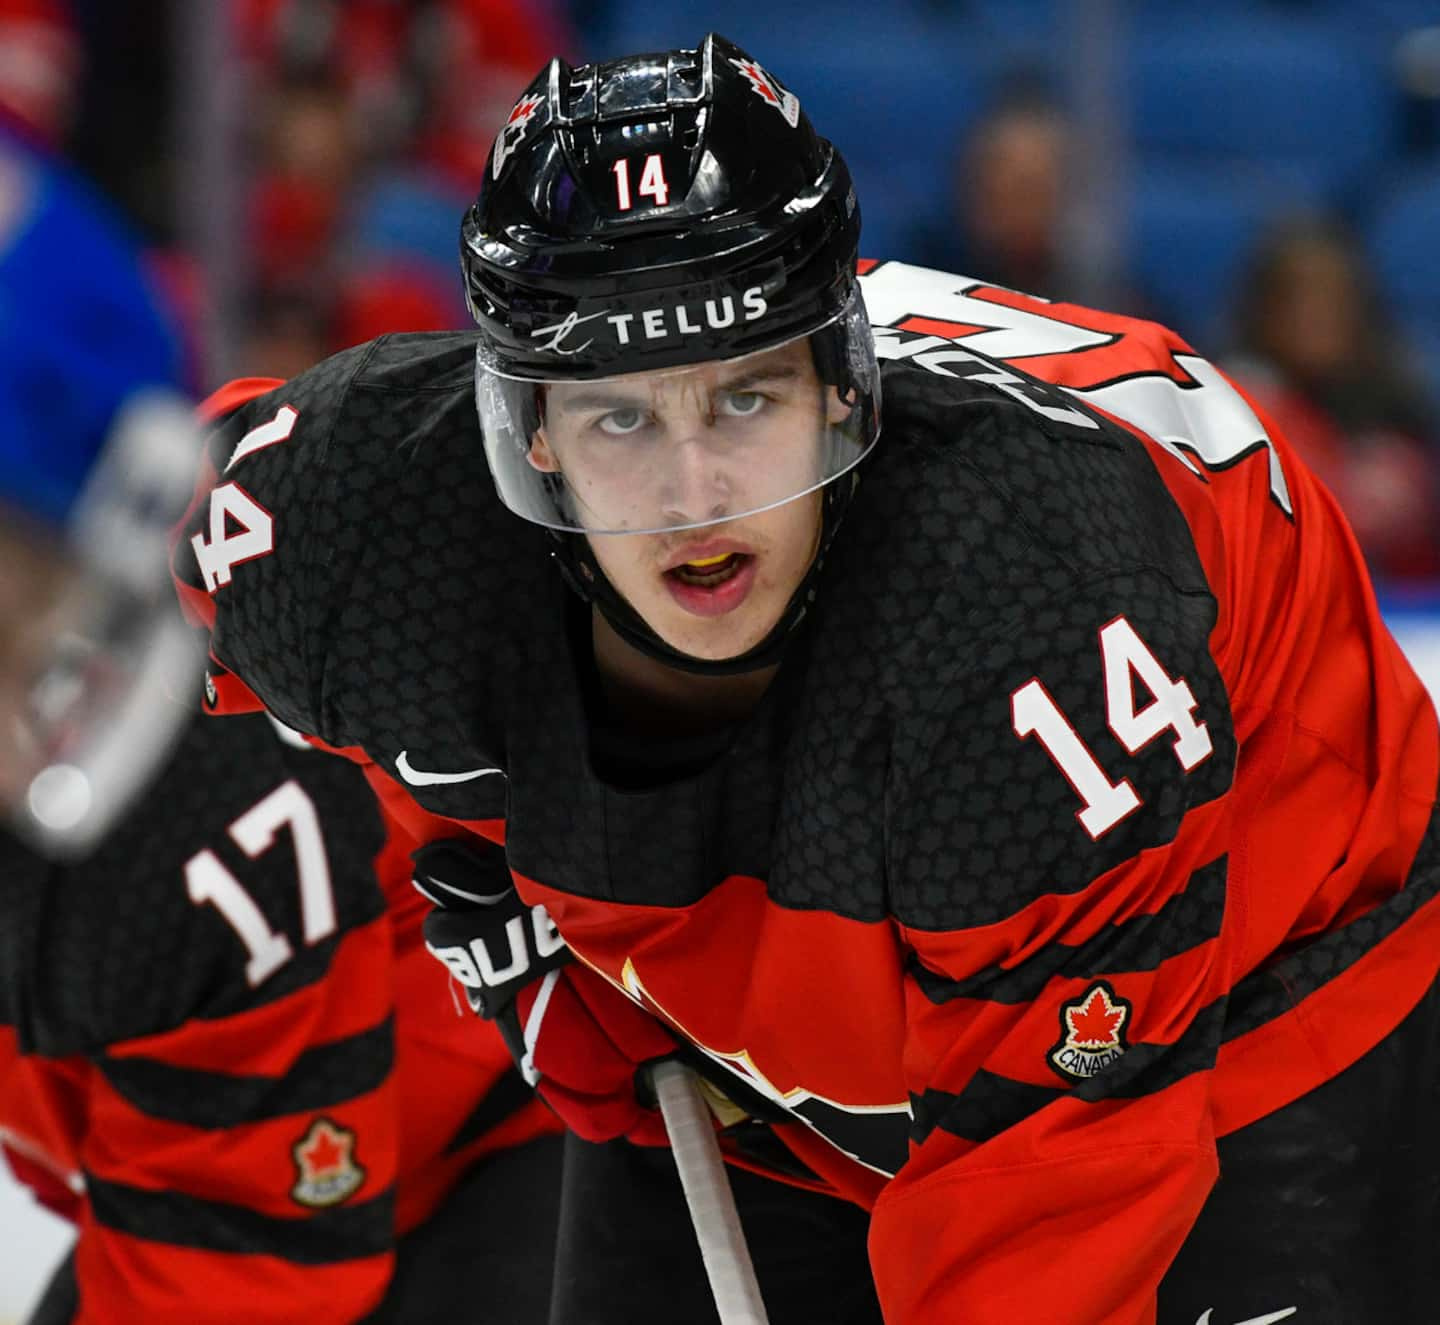 Hockey Canada: Maxime Comtois dissociates himself from the scandal